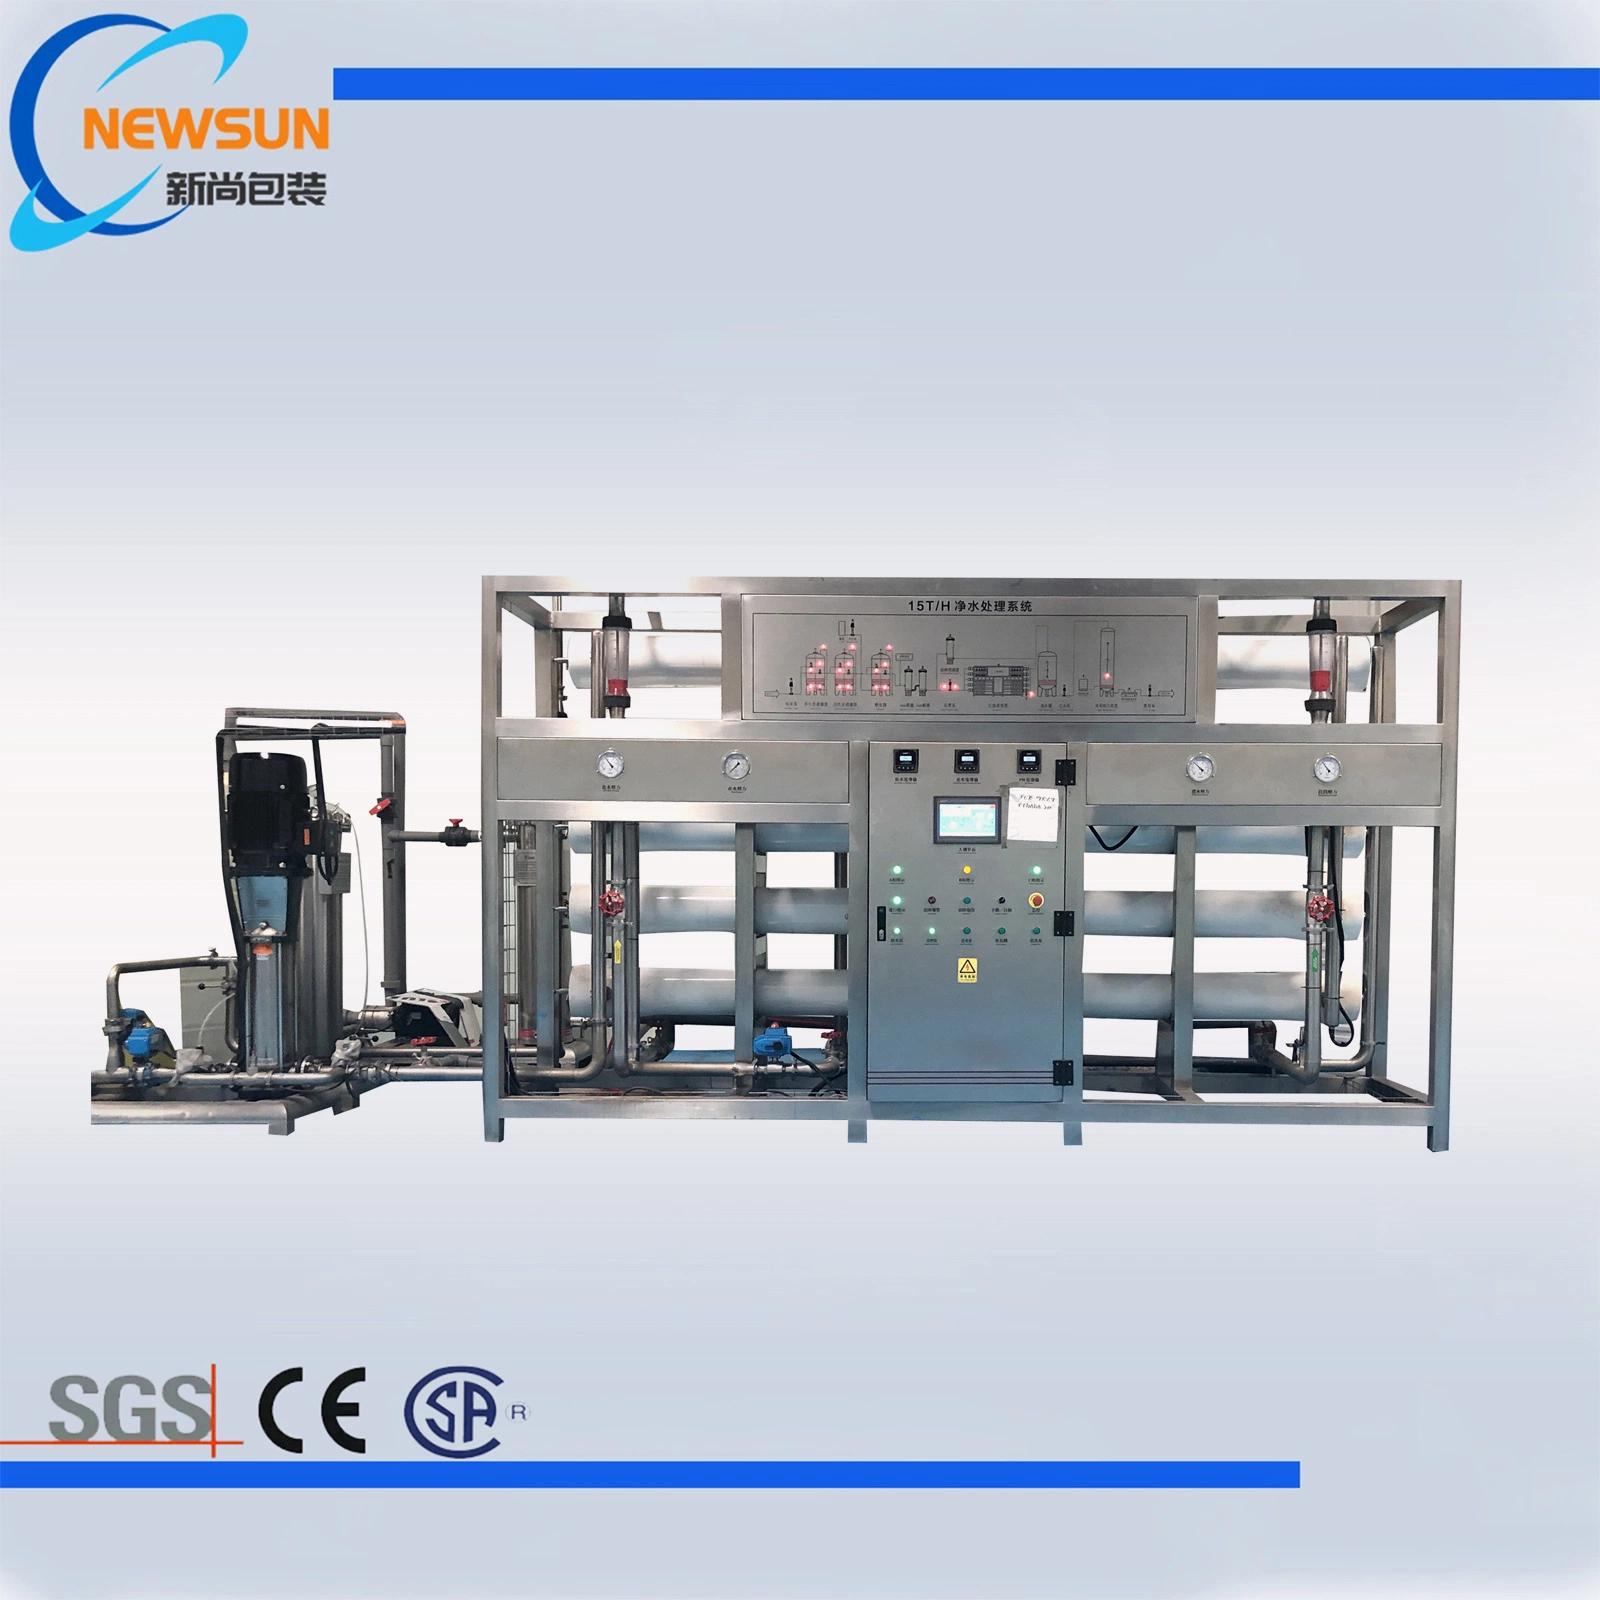 RO Reverse Osmosis Water Filtration System, Water Purification and Treatment Equipment